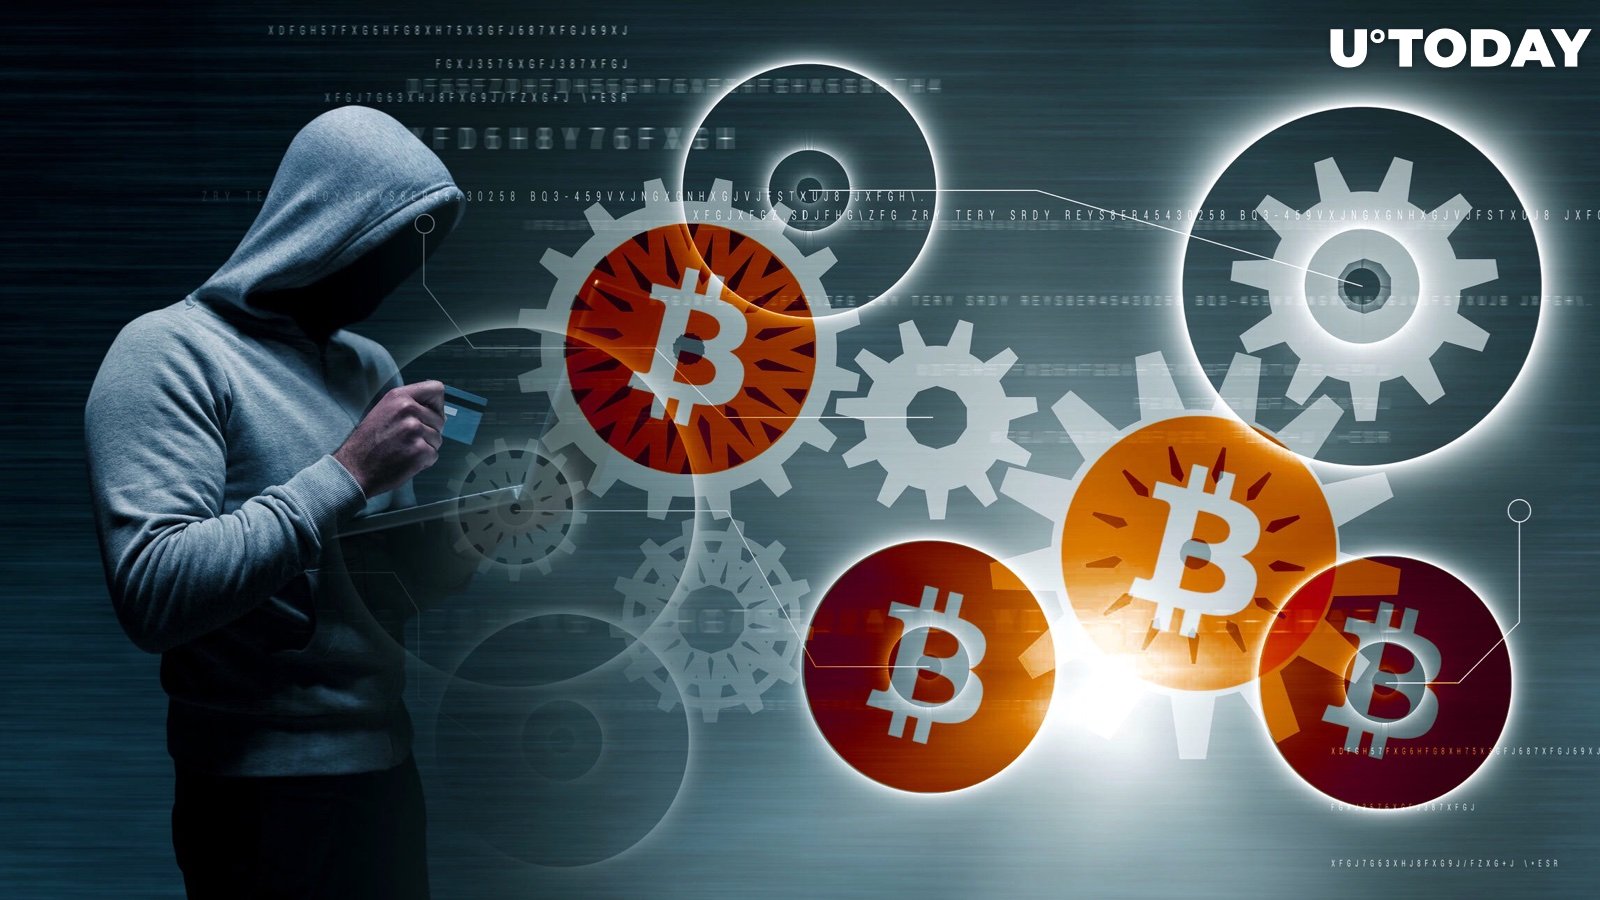 Crypto Crime Still Rampant in 2019 with Fraudsters Stealing $1.2 Bln: CipherTrace Report 